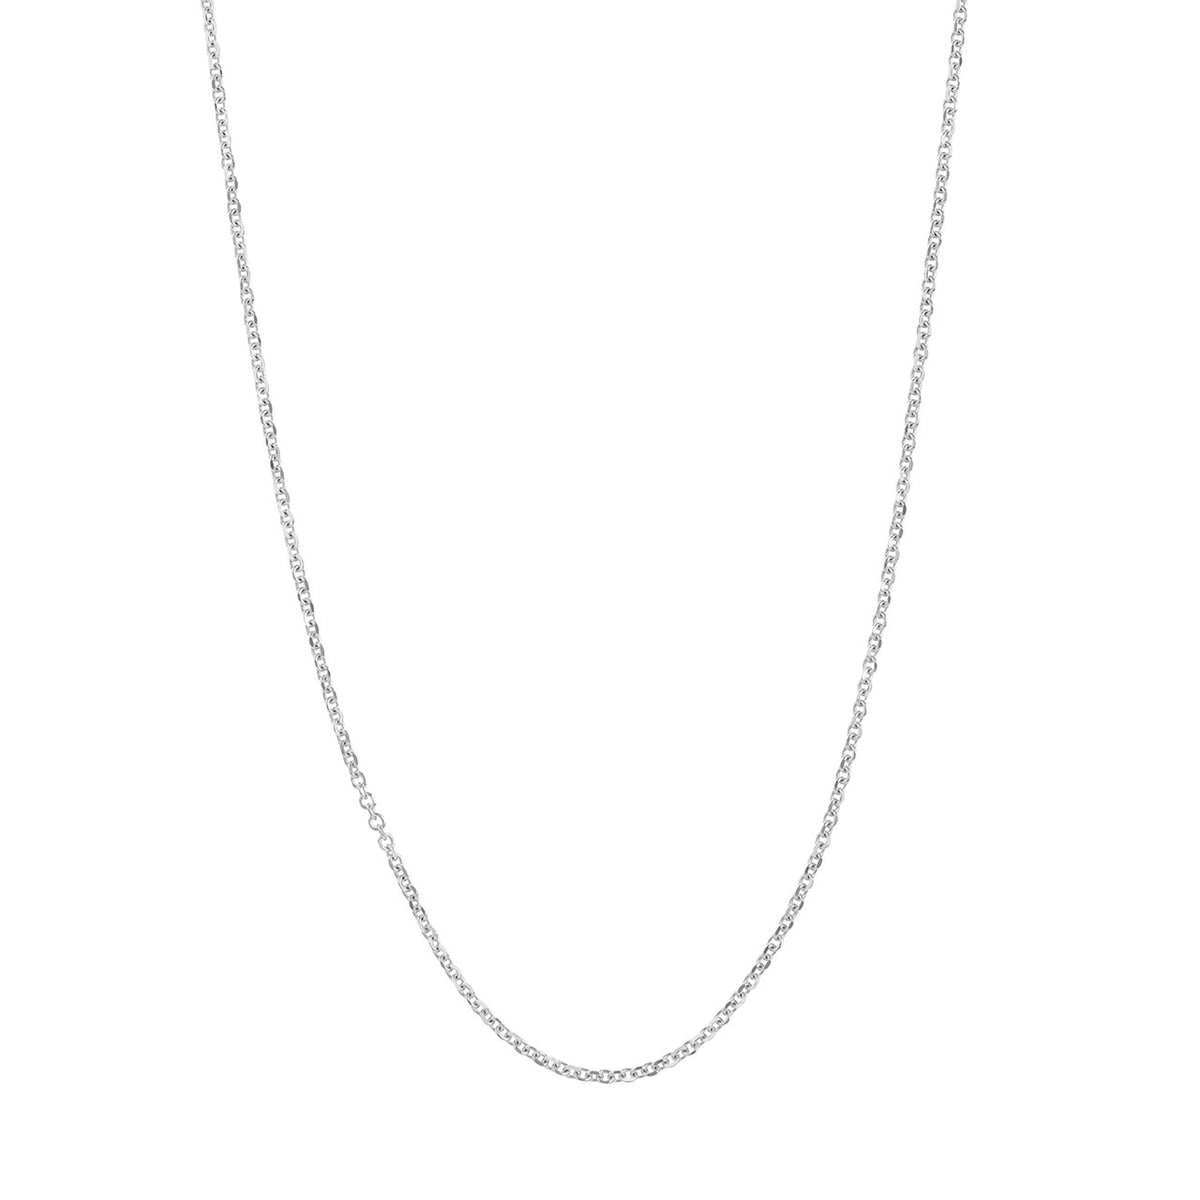 14K Yellow Gold, White Gold or Rose Gold 1.05mm Diamond-Cut Cable Chain Necklace with Lobster Lock and Adjustable Slider Bead